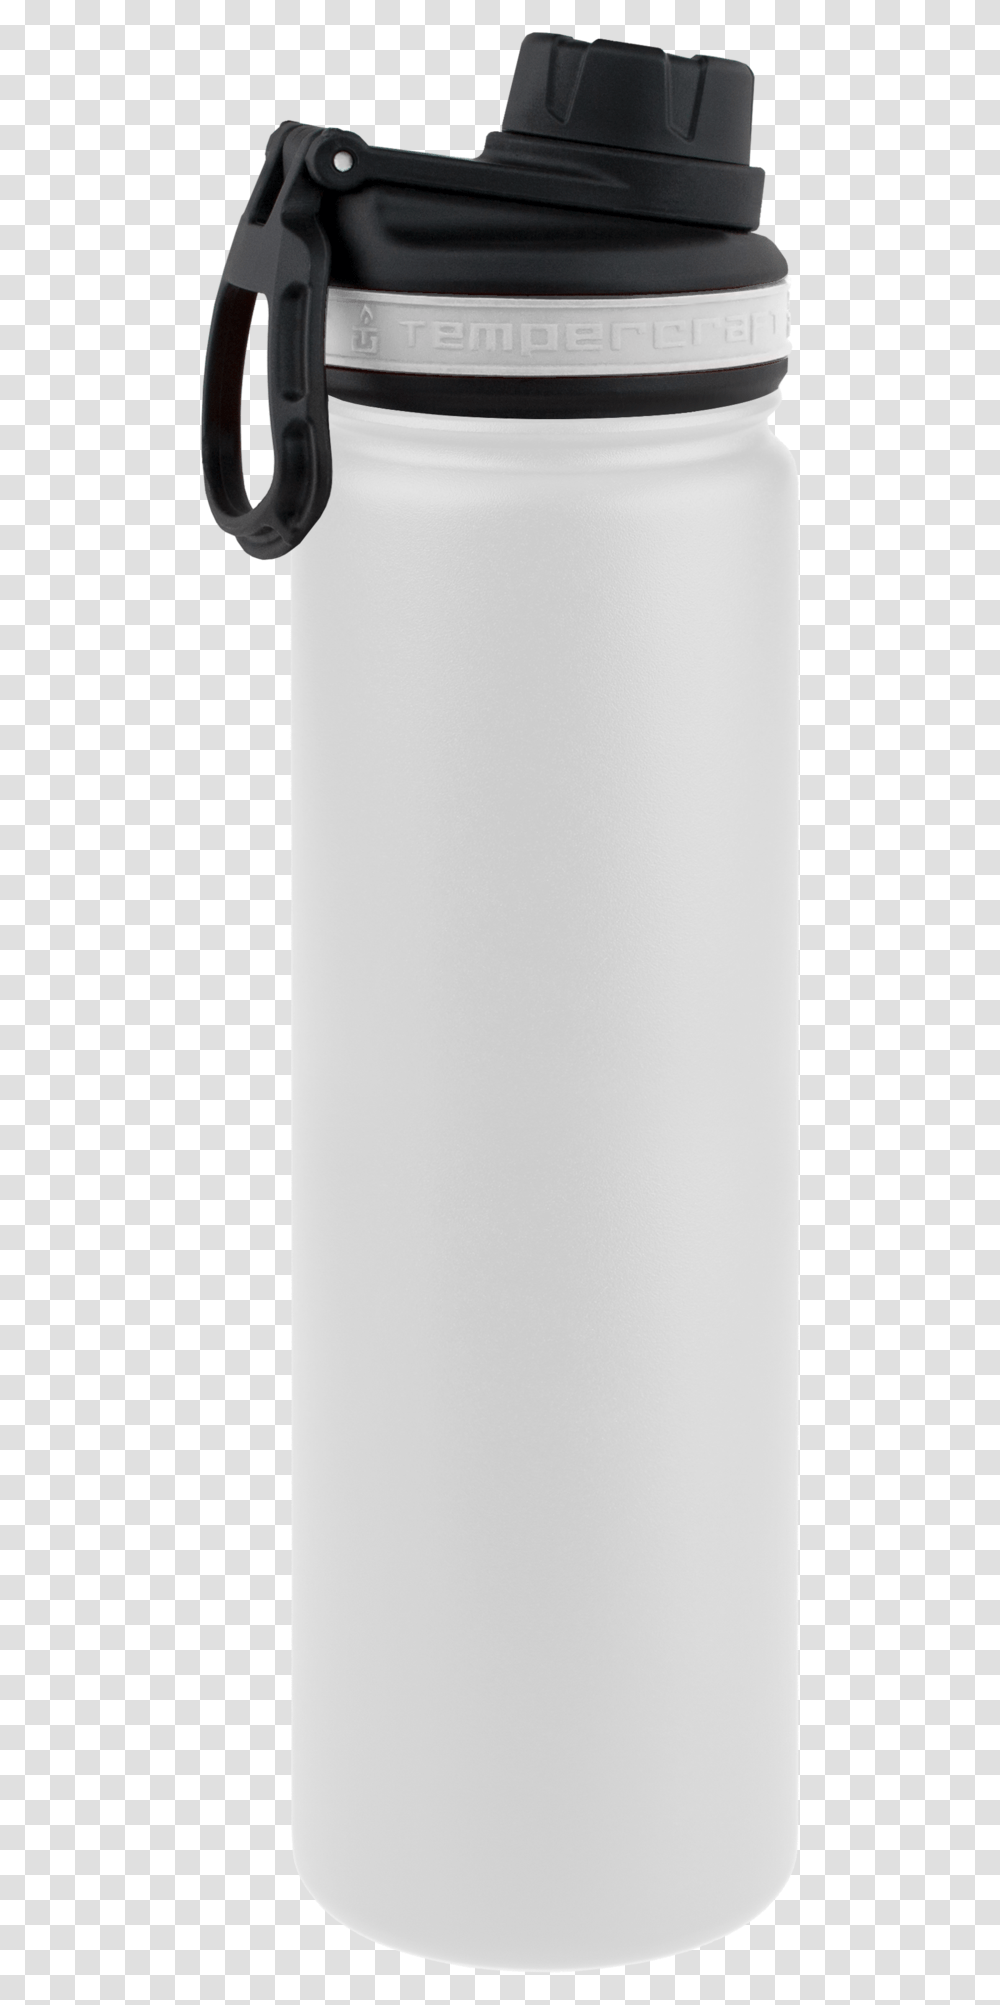 TempercraftquotClassquotlazyload Lazyload Fade In Cloudzoom White Water Bottle, Appliance, Refrigerator, Dishwasher, Cooker Transparent Png